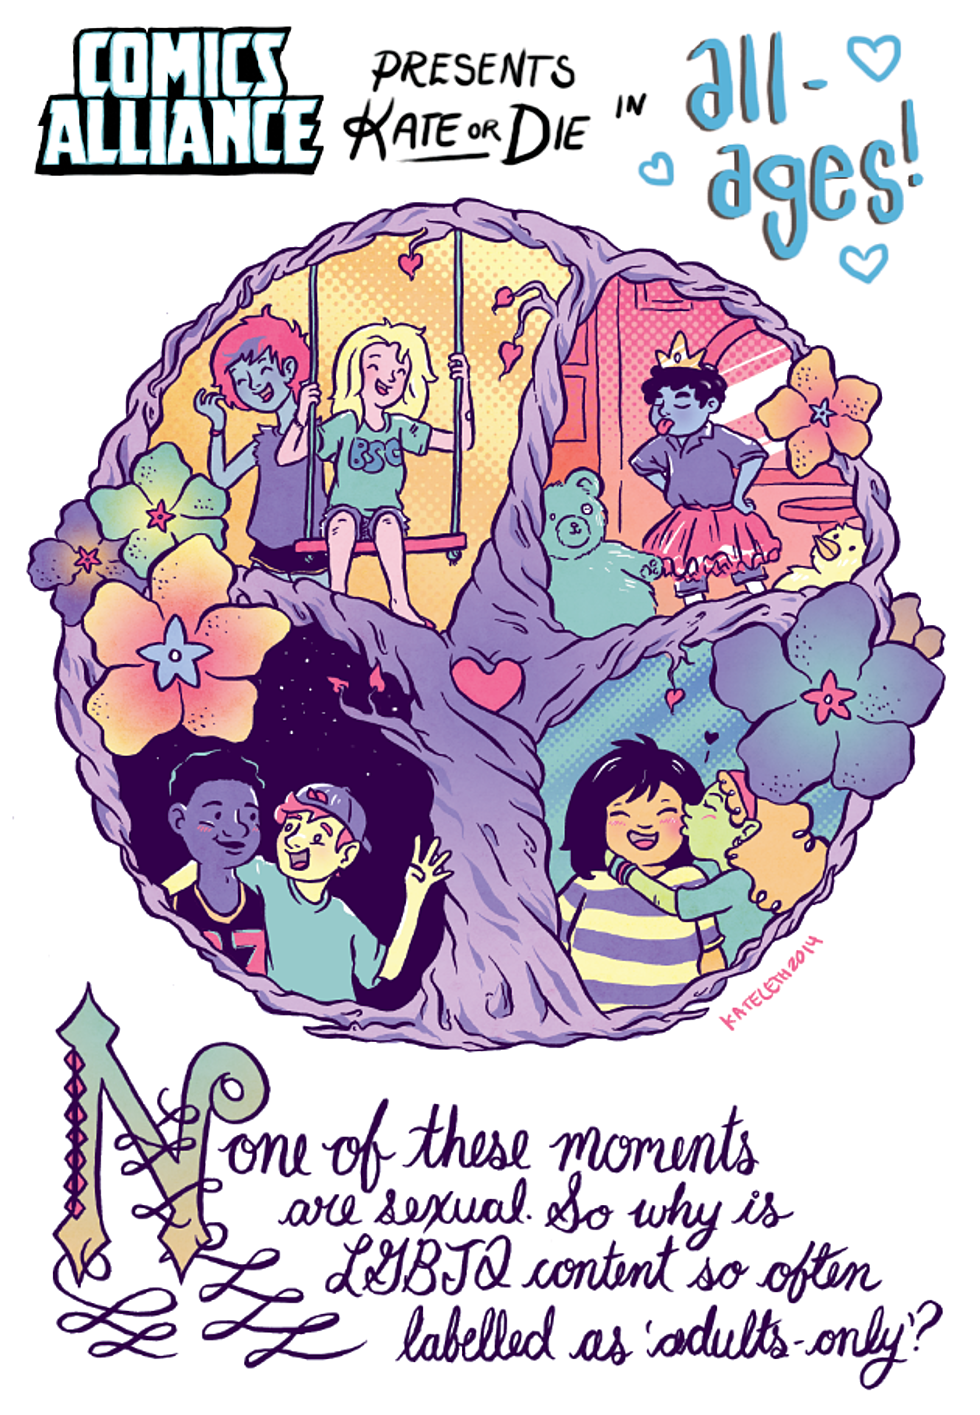 Comics Alliance Presents Kate Or Die: All-Ages LGBT Content